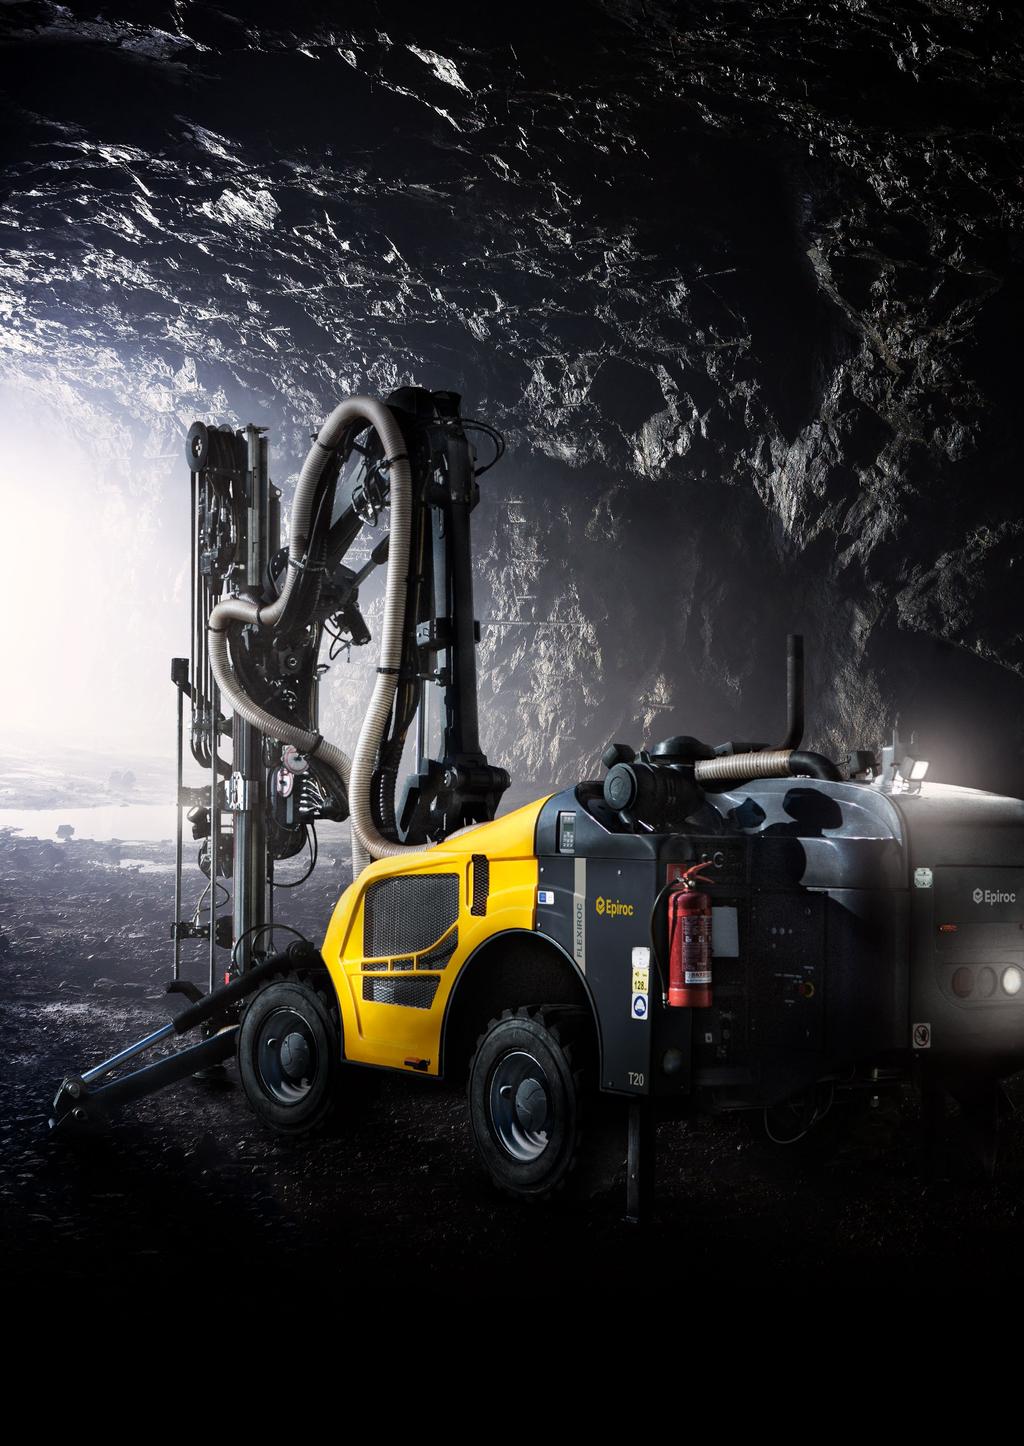 FlexiROC T20 R A drill rig for surface- and